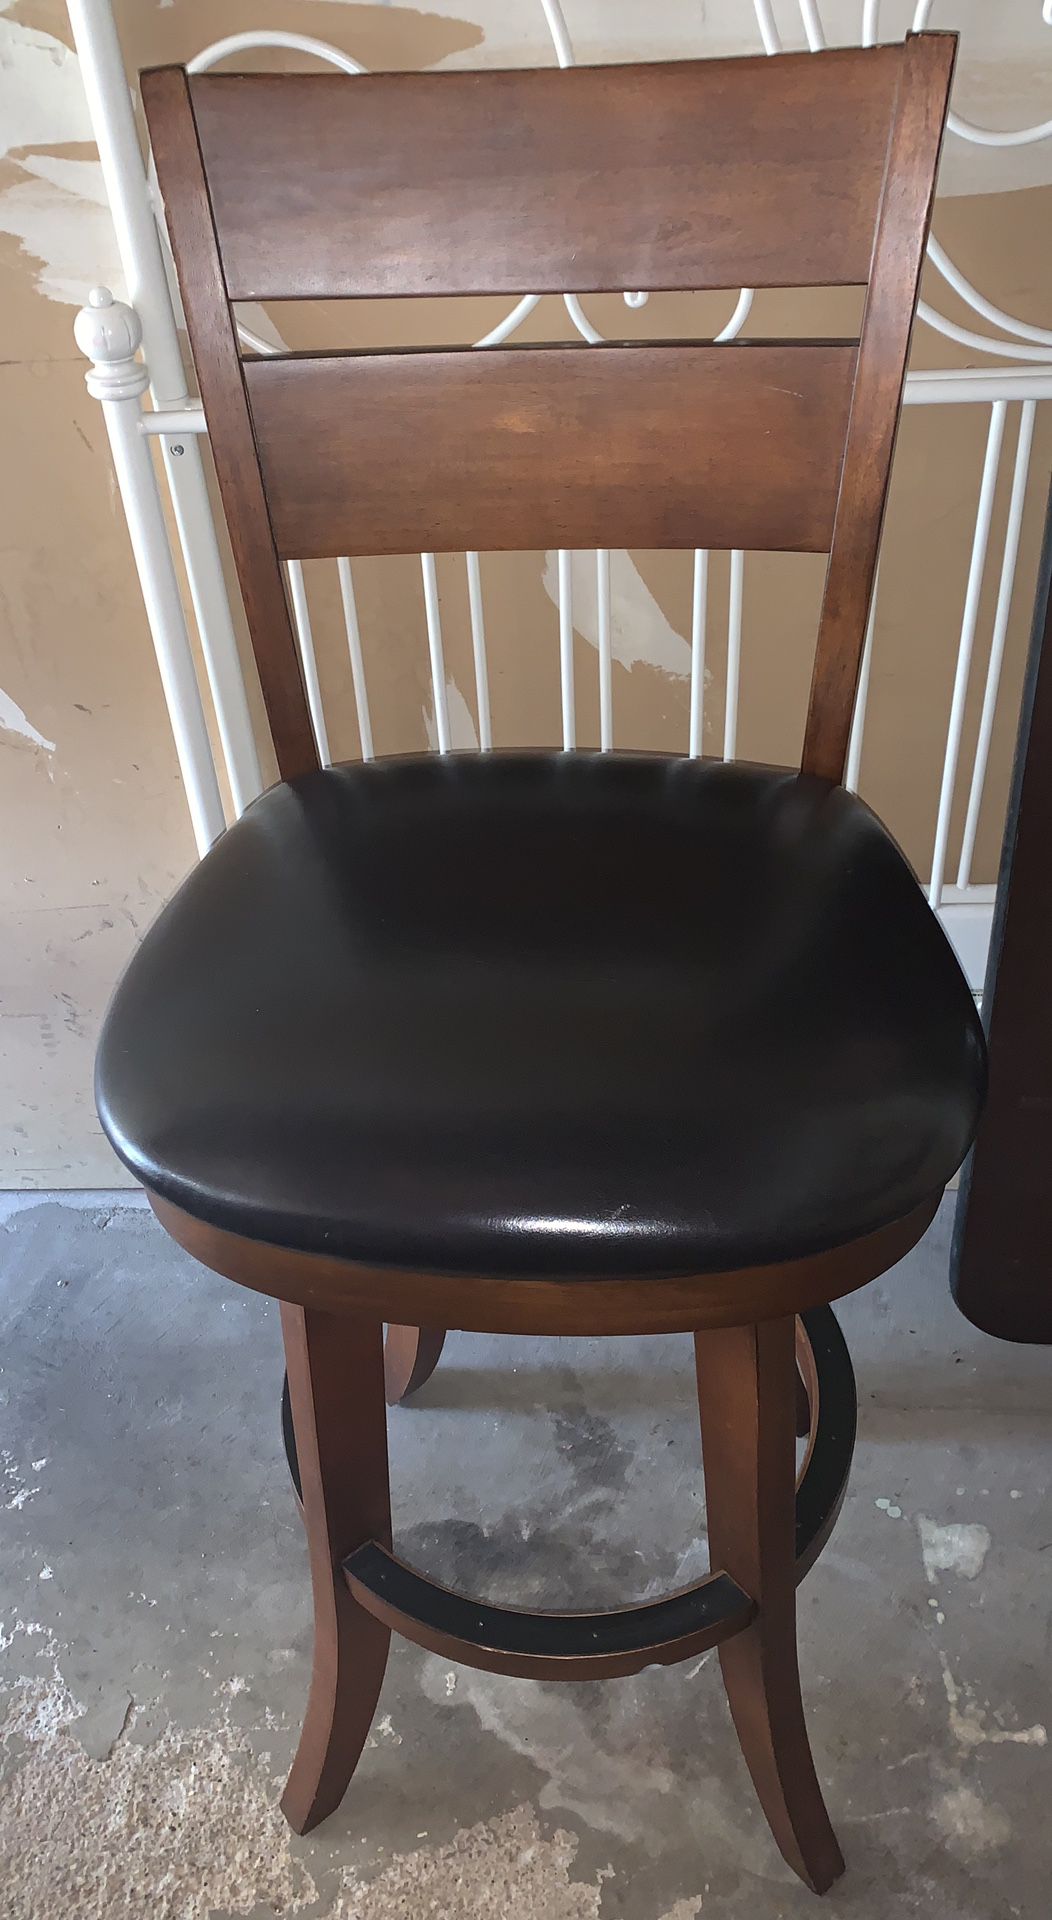 Bar stool, high chair only have 1